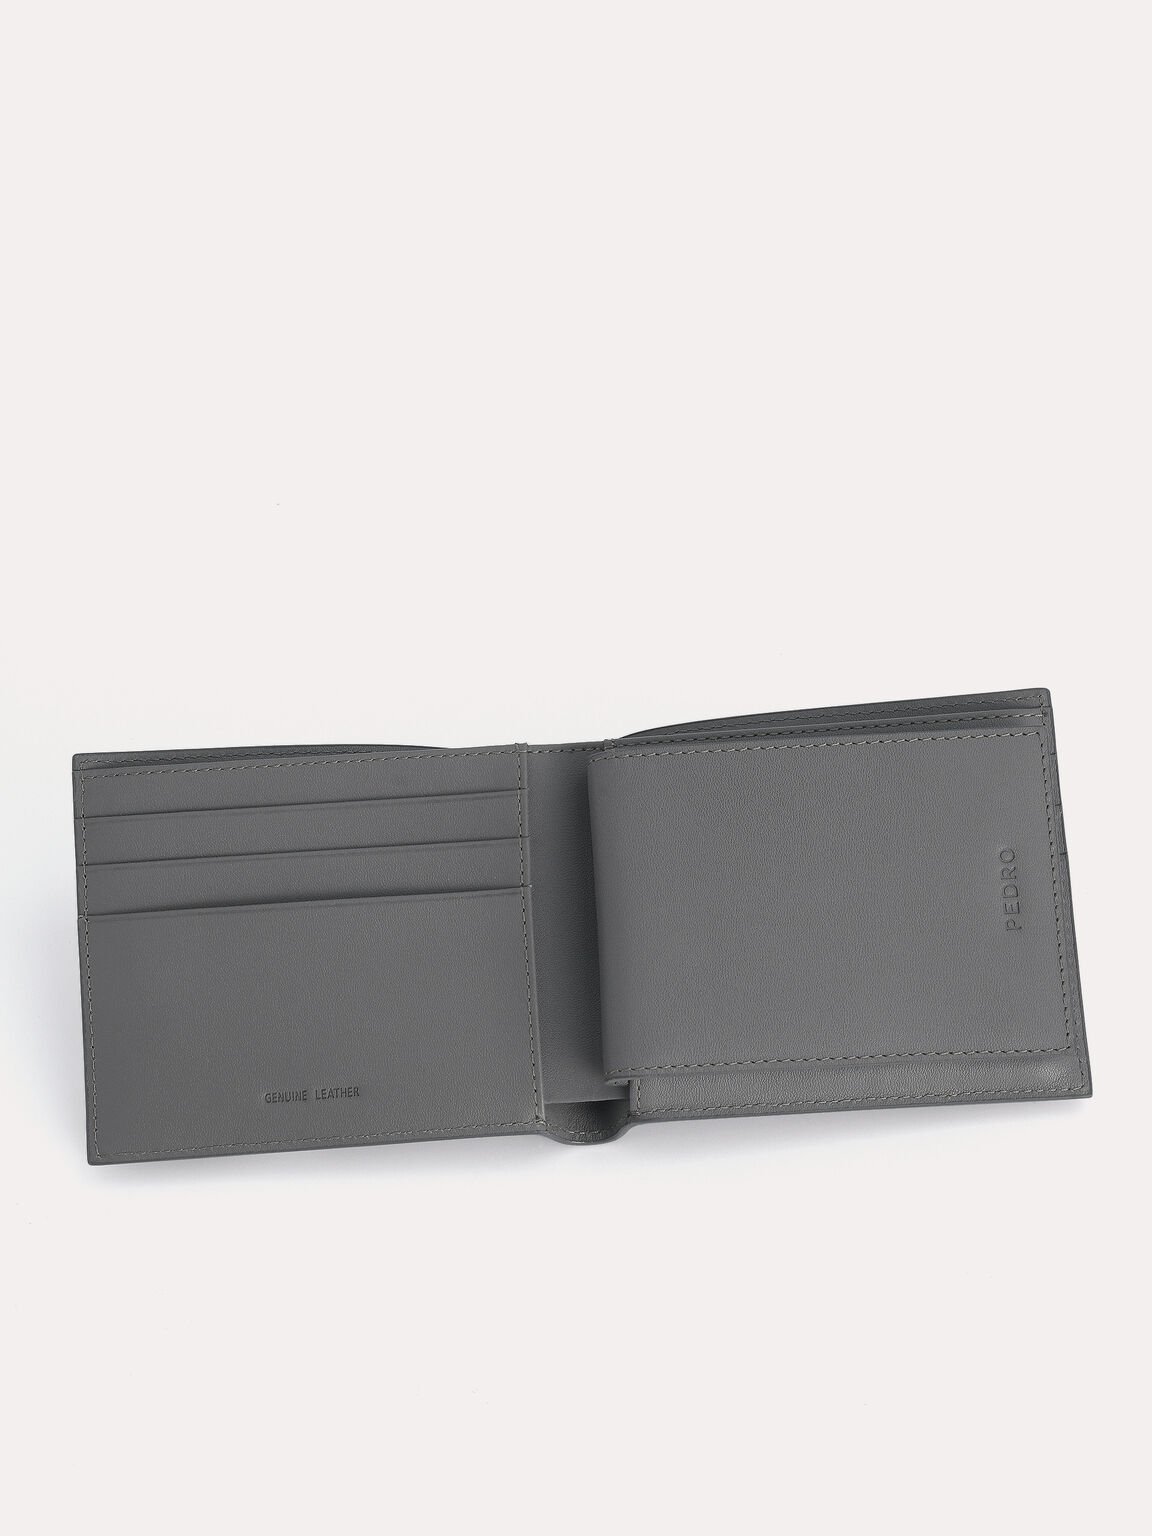 Textured Leather Bi-Fold Wallet with Insert, Grey, hi-res